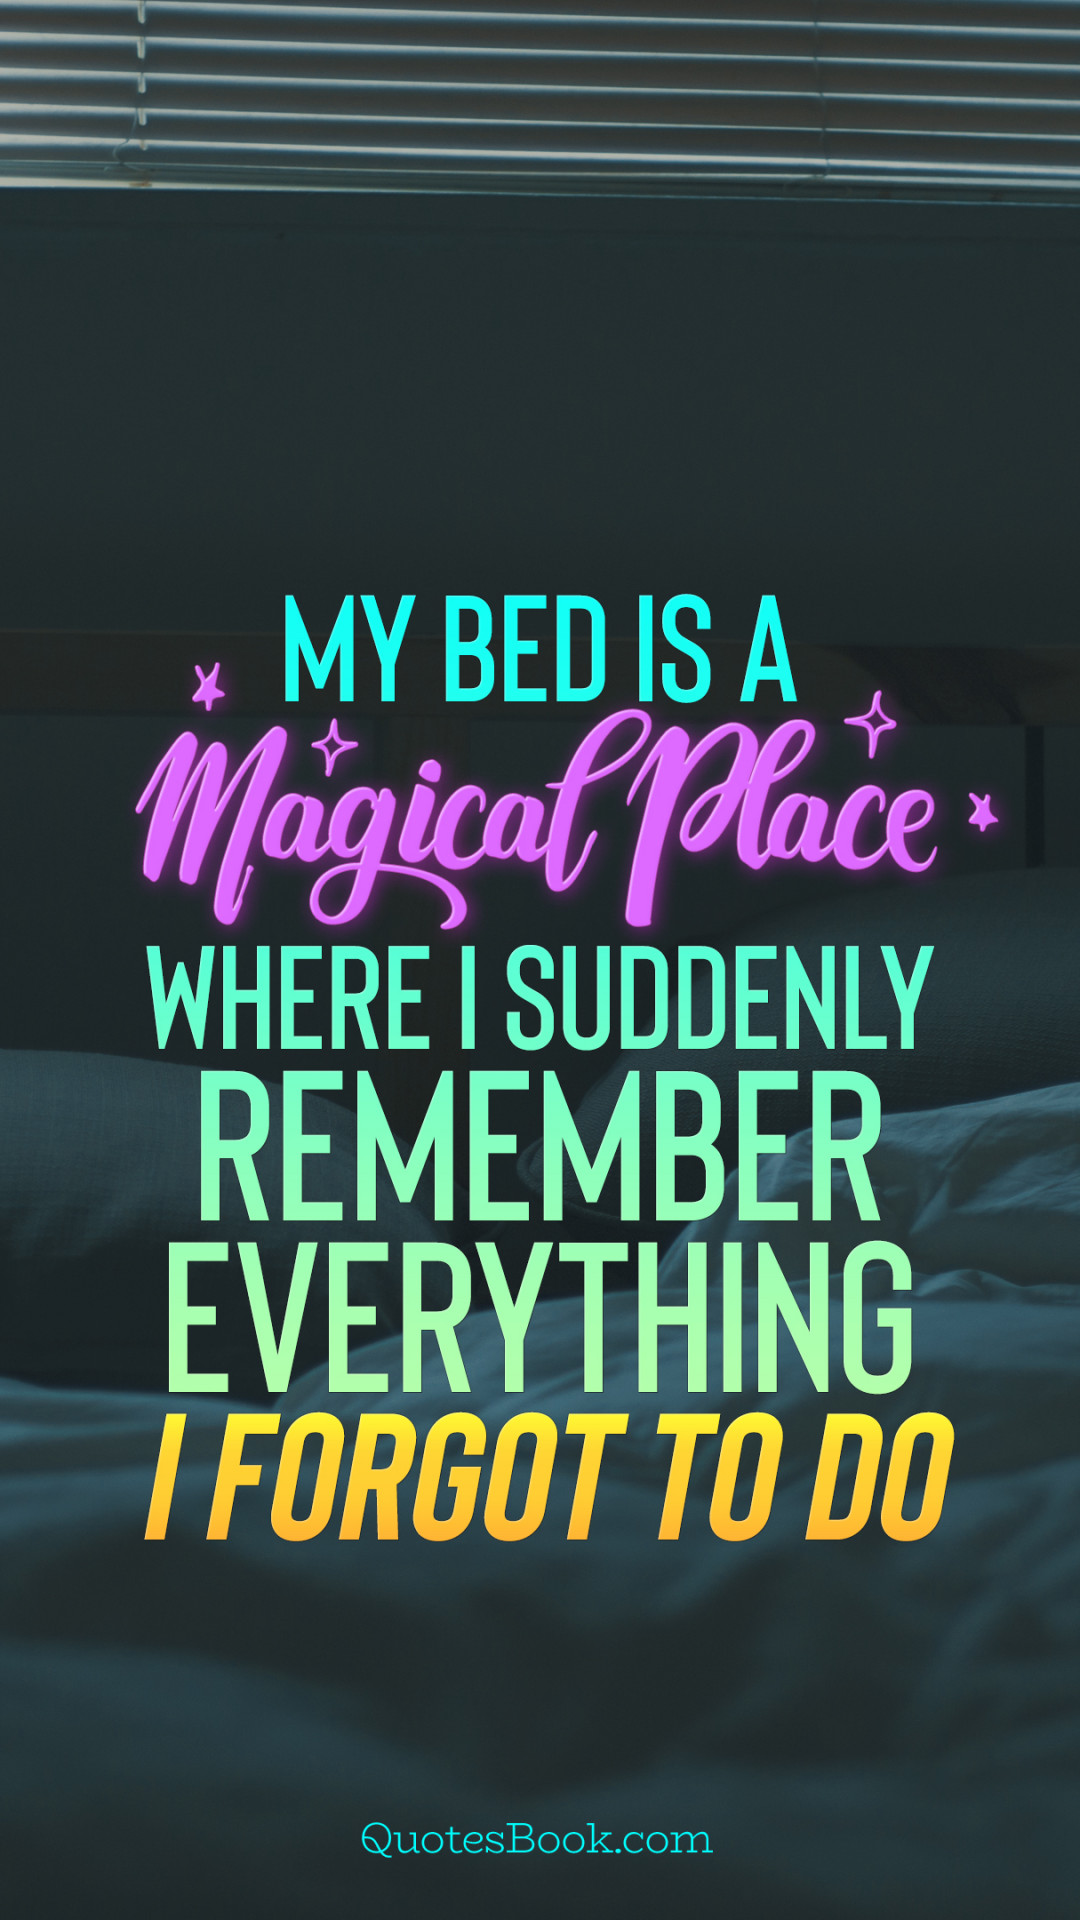 My bed is a magical place where I suddenly remember everything I forgot ...